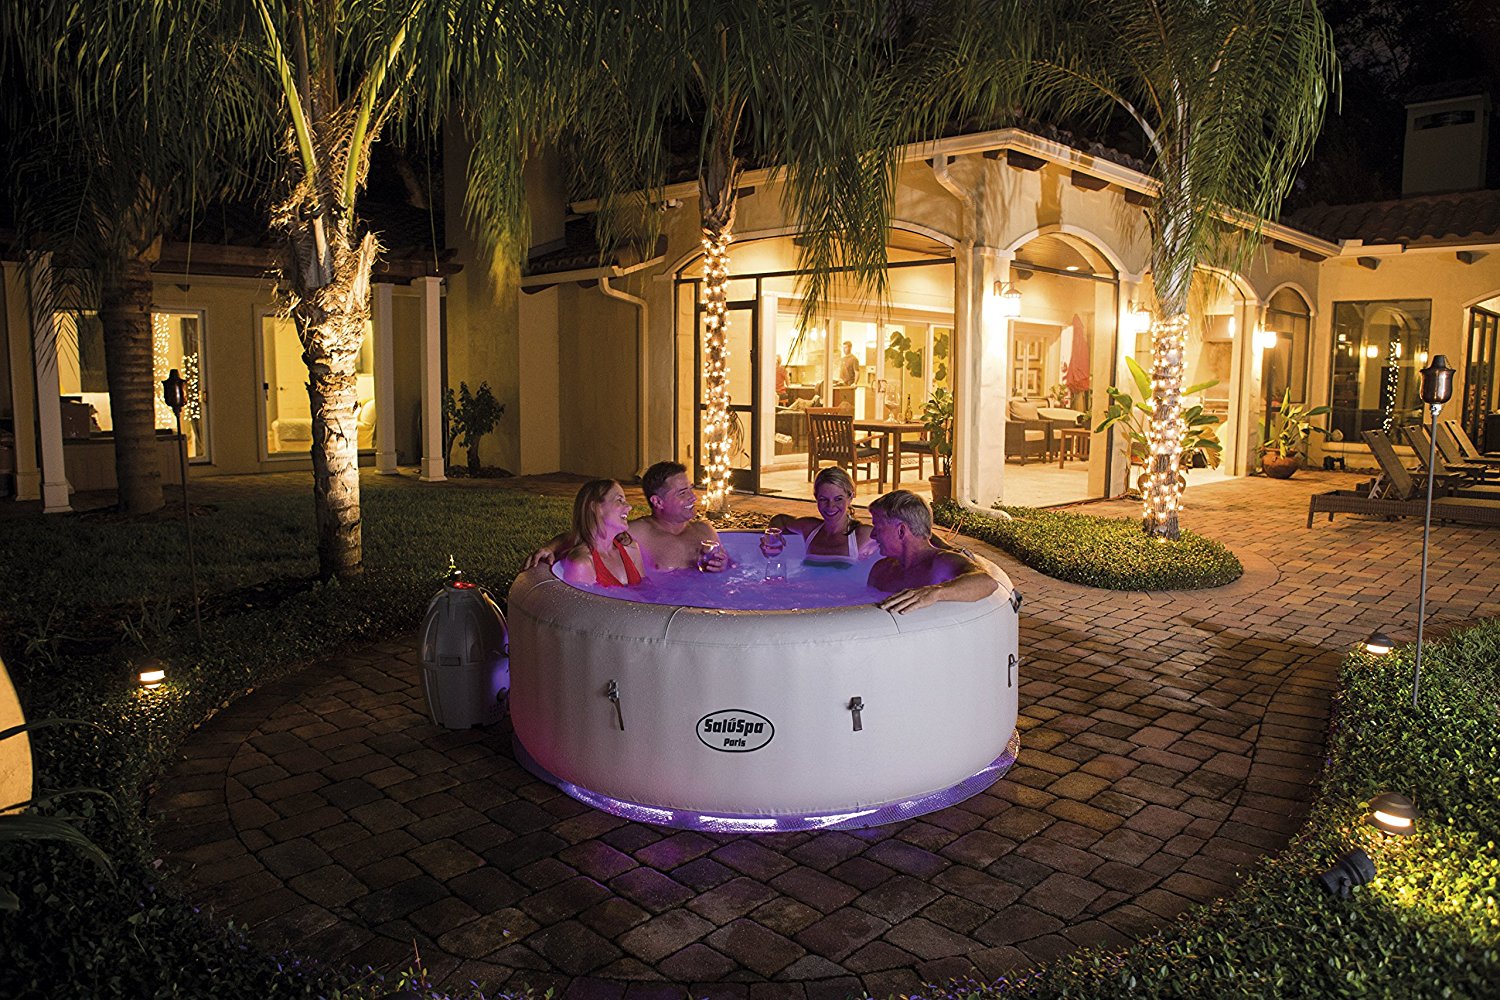 Inflatable Lazy Spa Hot Tub with lights - LED lights